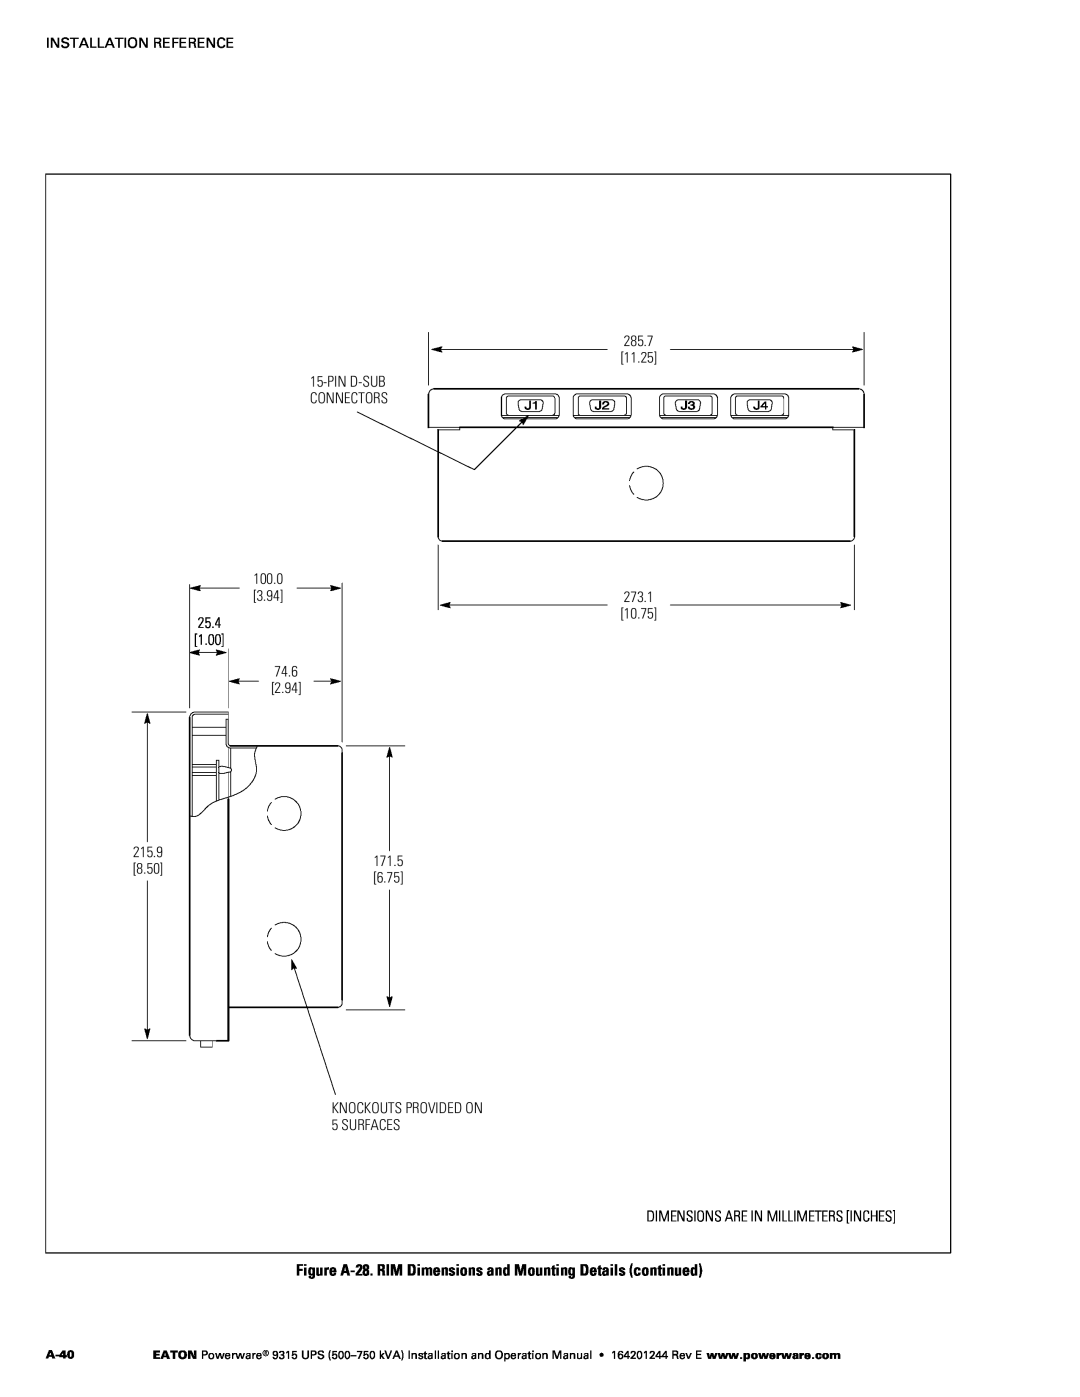 Powerware Powerware 9315 operation manual Figure A‐28. RIM Dimensions and Mounting Details continued, A-40 